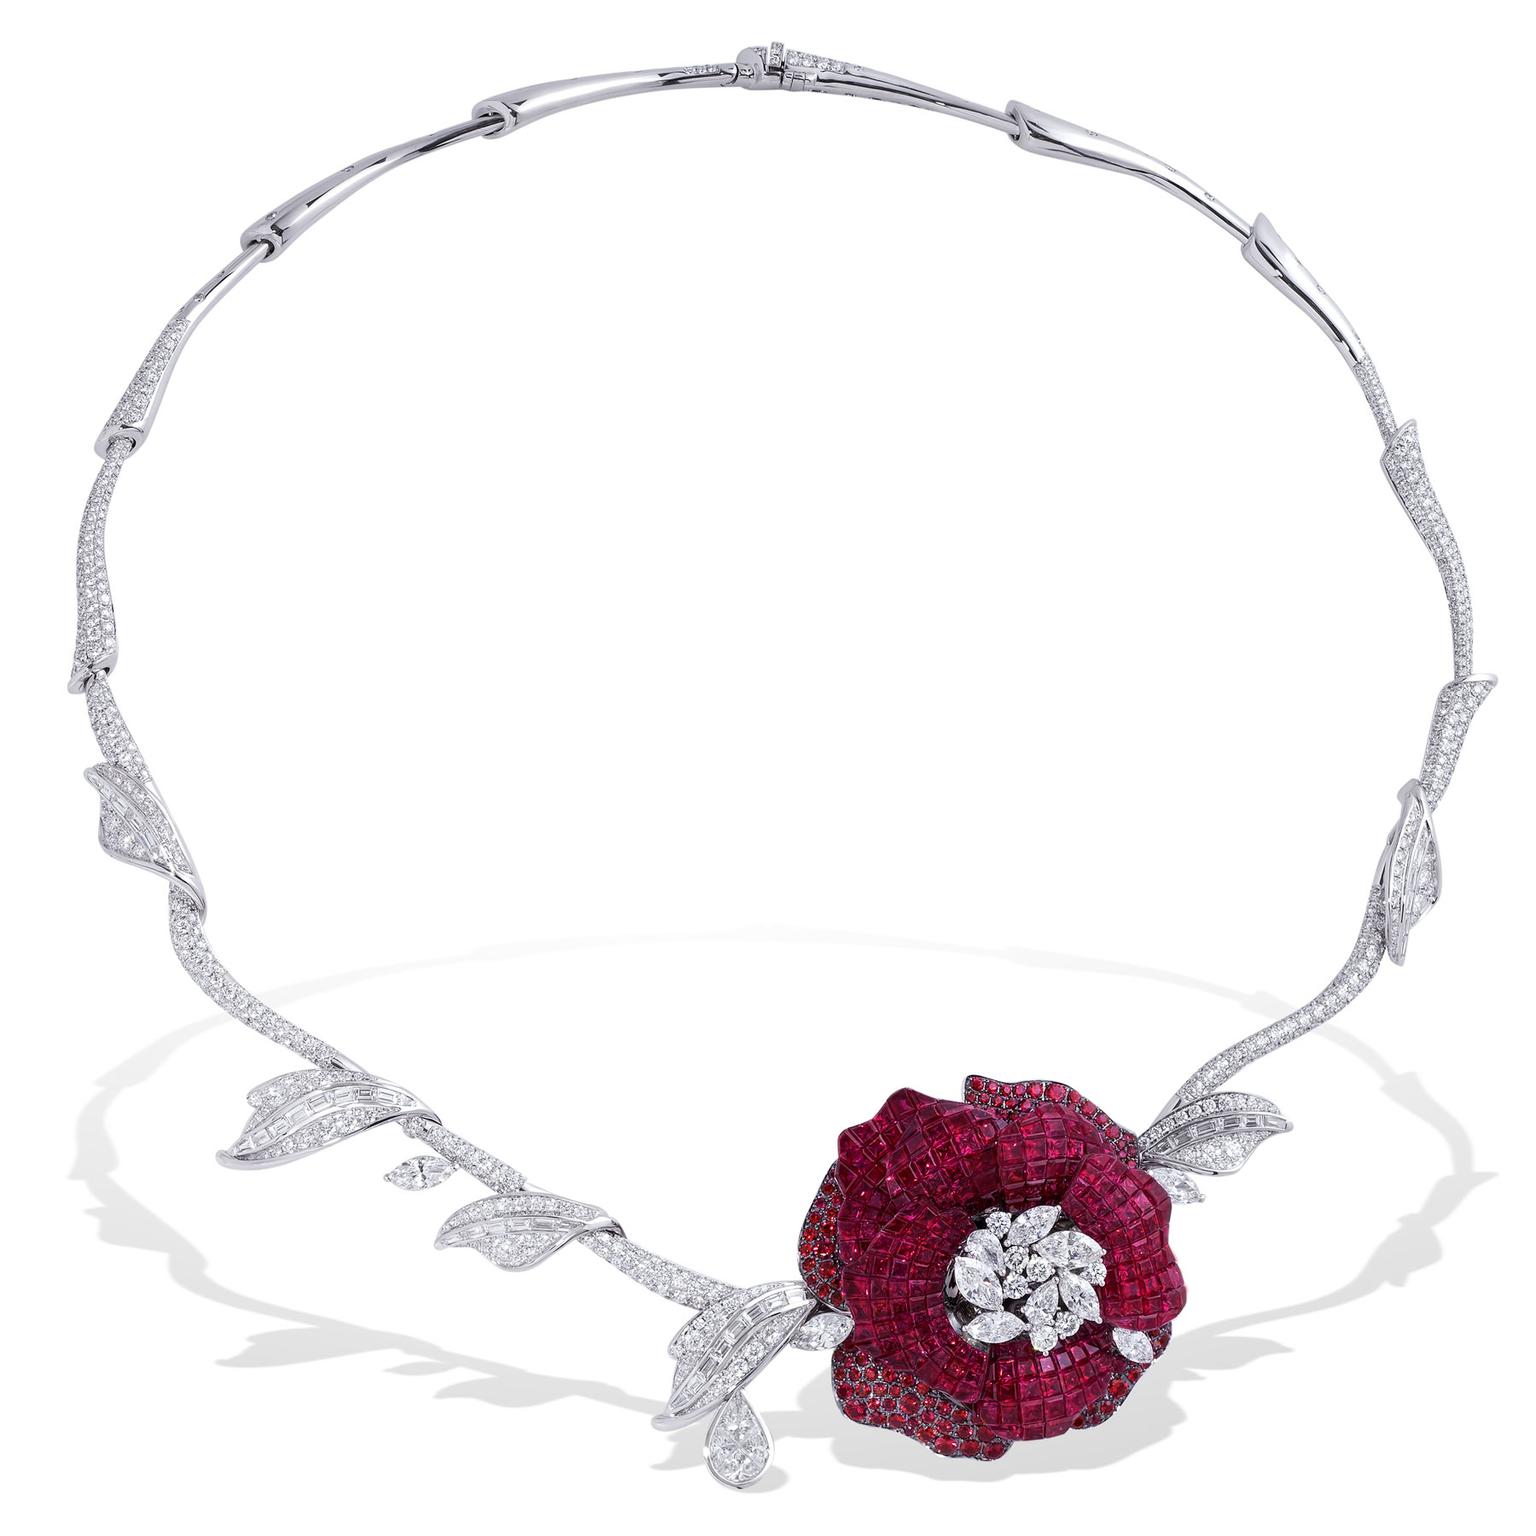 Stenzhorn Rose Red ruby high jewellery necklace